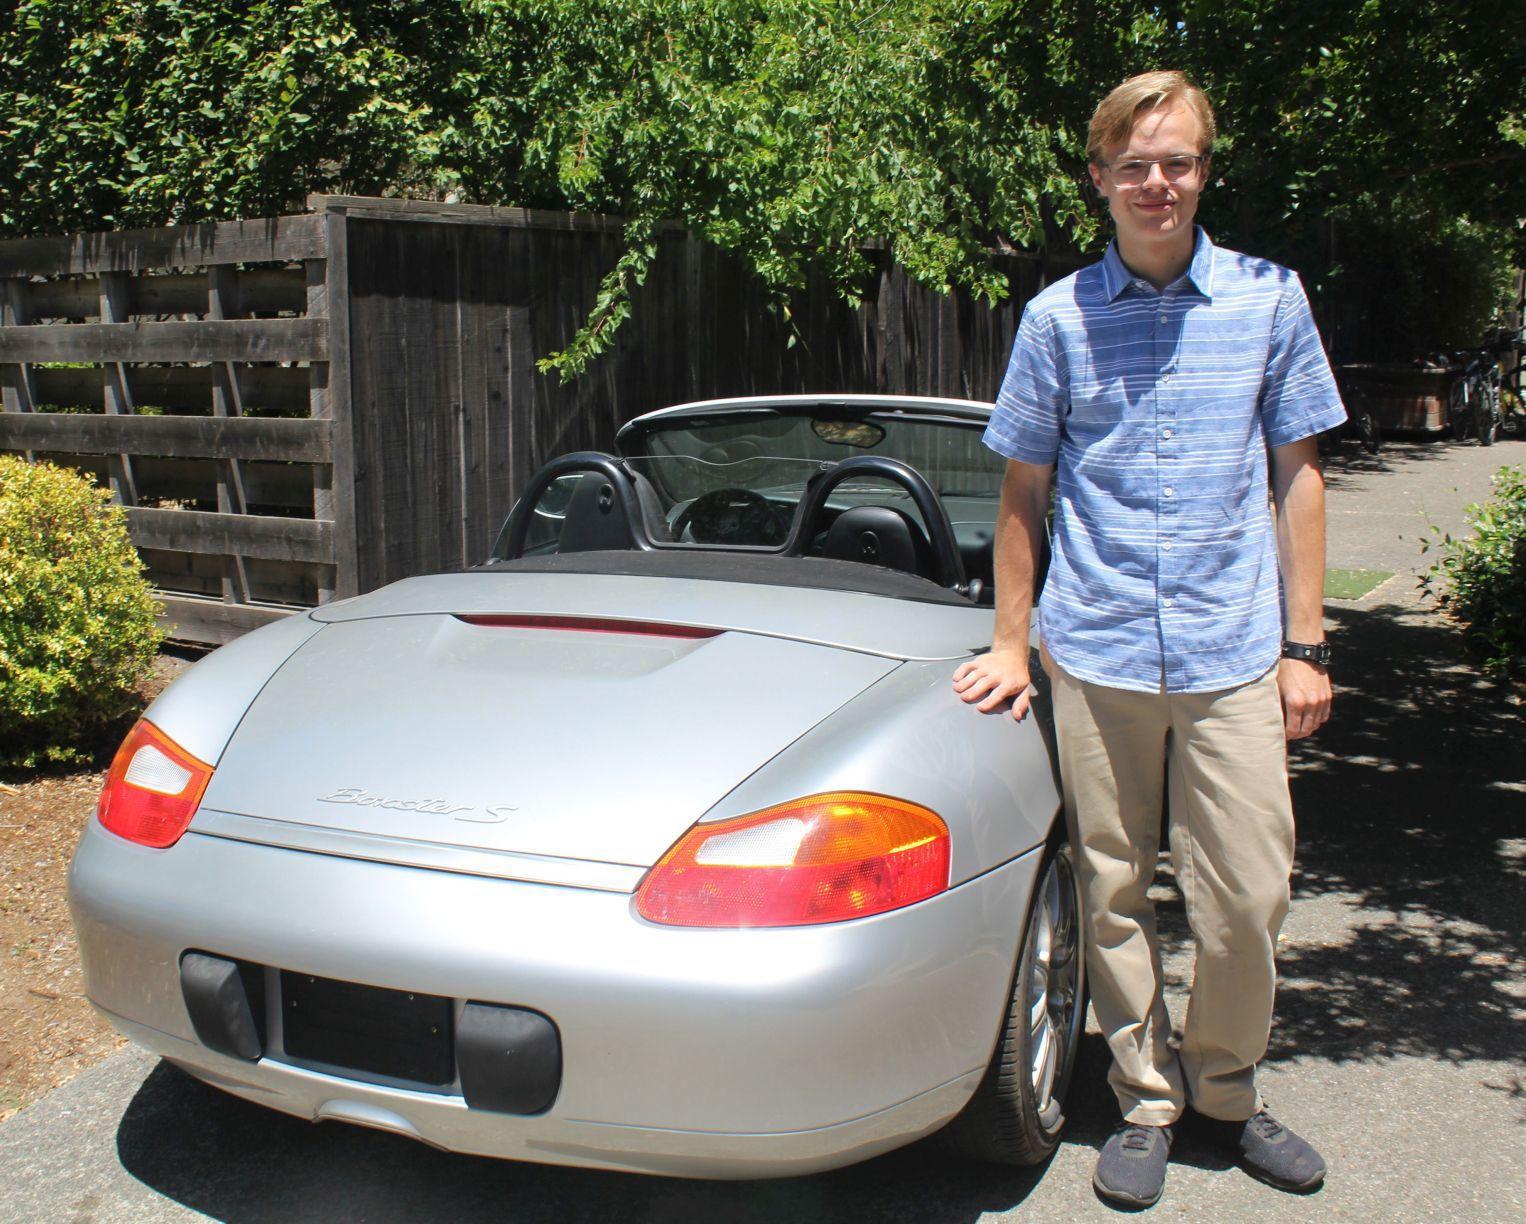 00 Porsche Boxster S Gets New Life As An Ev Thanks To Gifted Teen